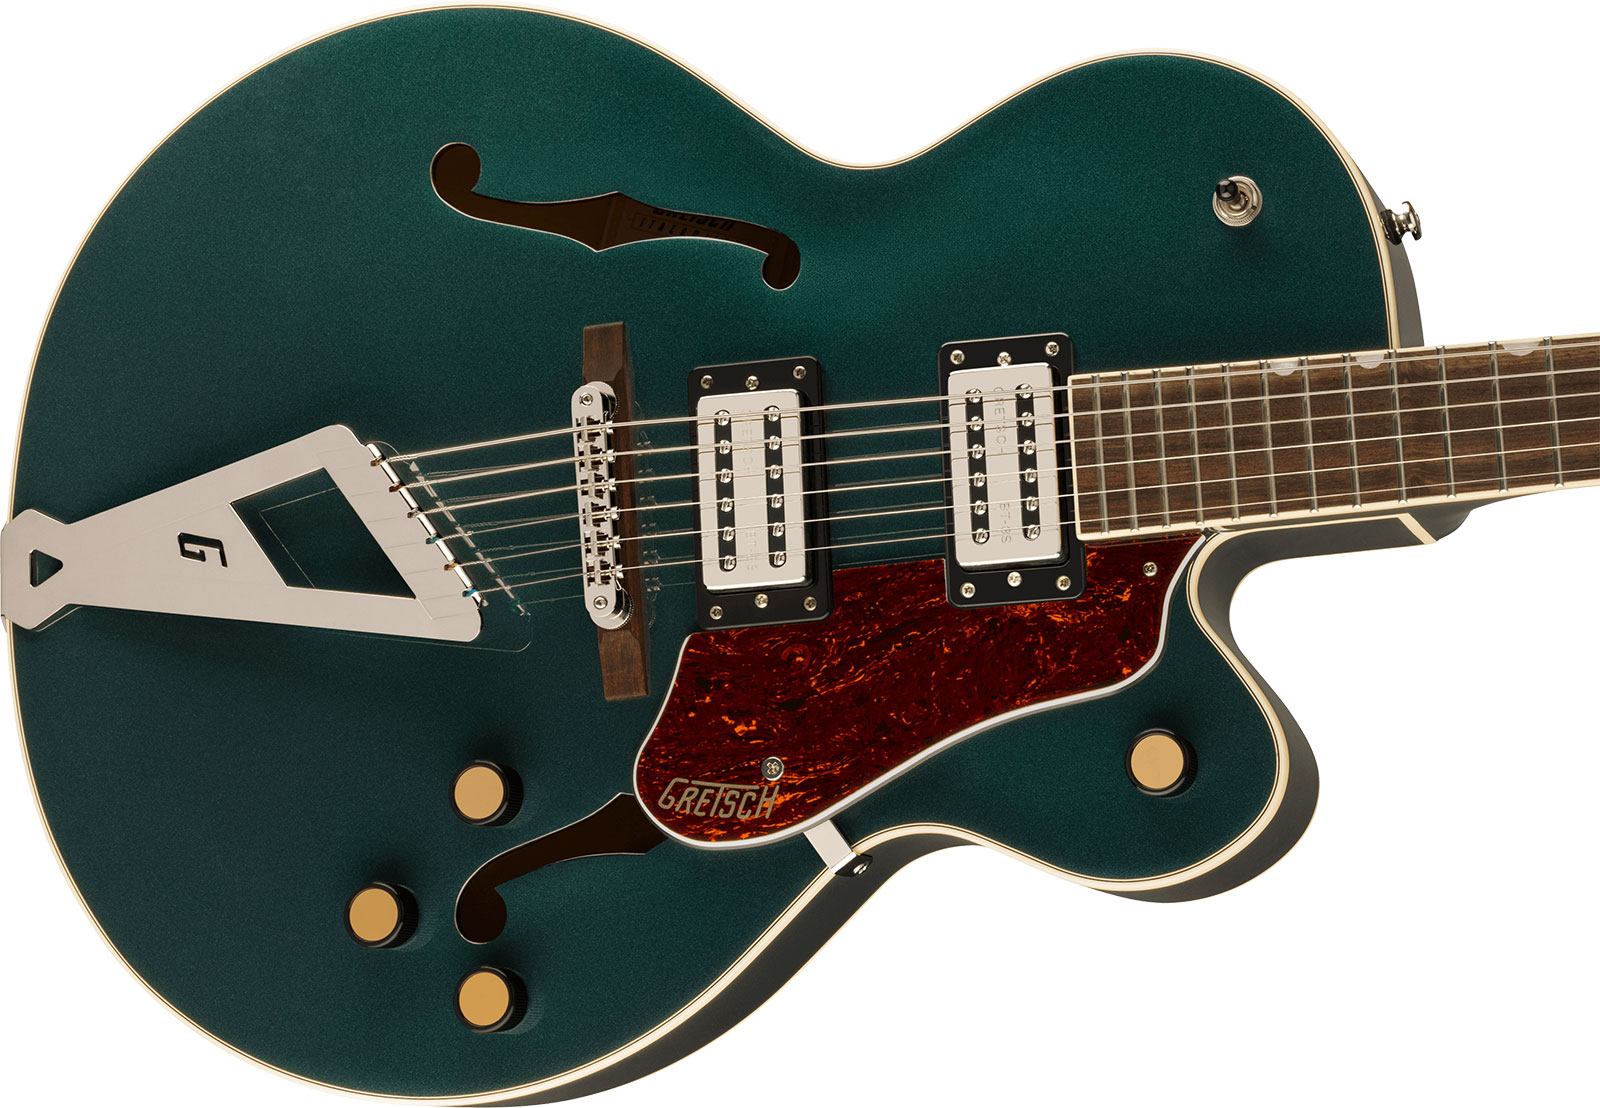 Gretsch G2420 Streamliner Hollow Body With Chromatic Ii 2h Ht Lau - Cadillac Green - Hollow-body electric guitar - Variation 2